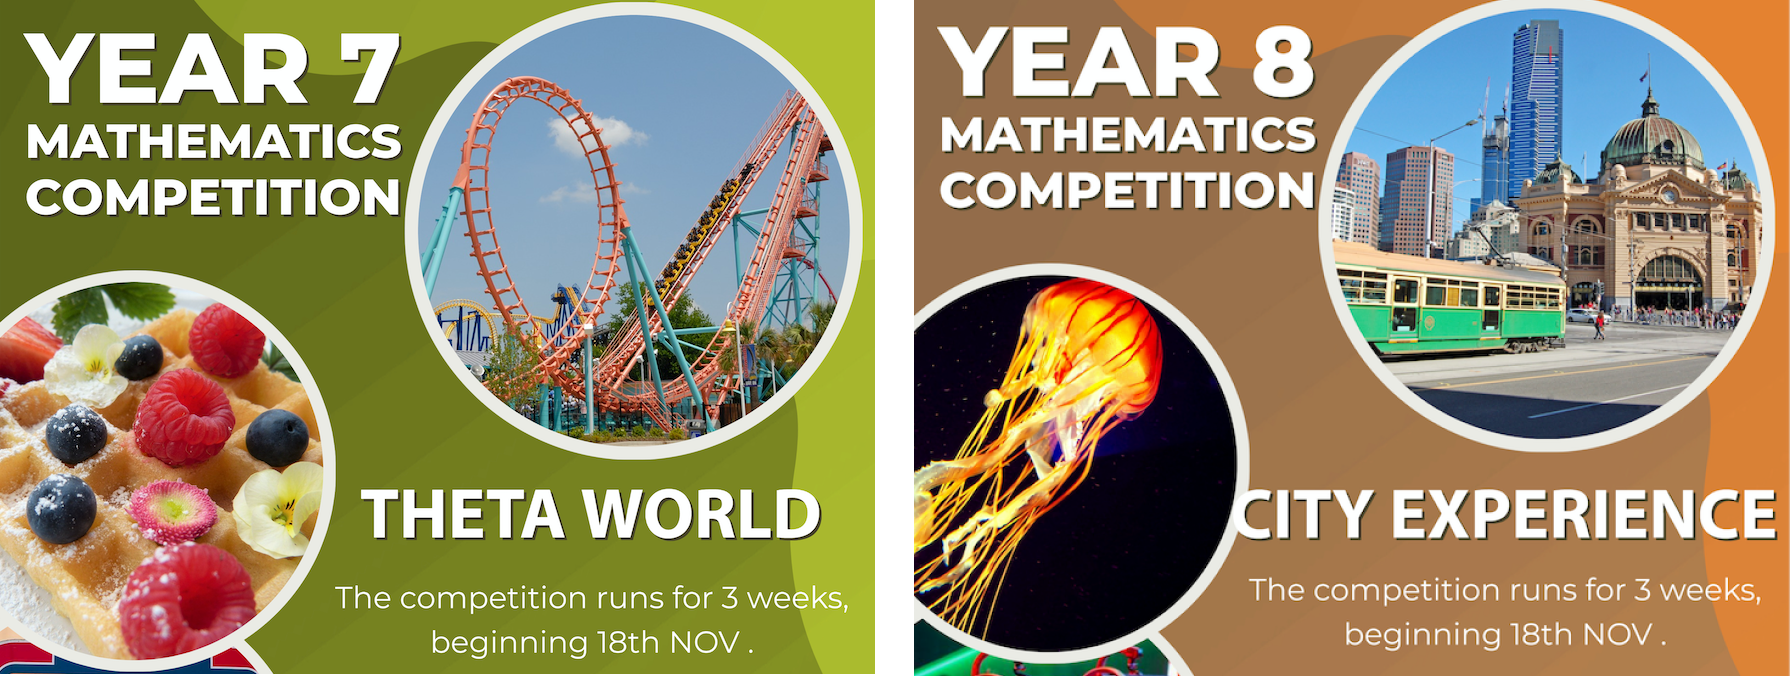 Year 7 mathematics competition "Theta World", and Year 8 competition "City Experience", runs for 3 weeks, beginning 18th Nov 2021